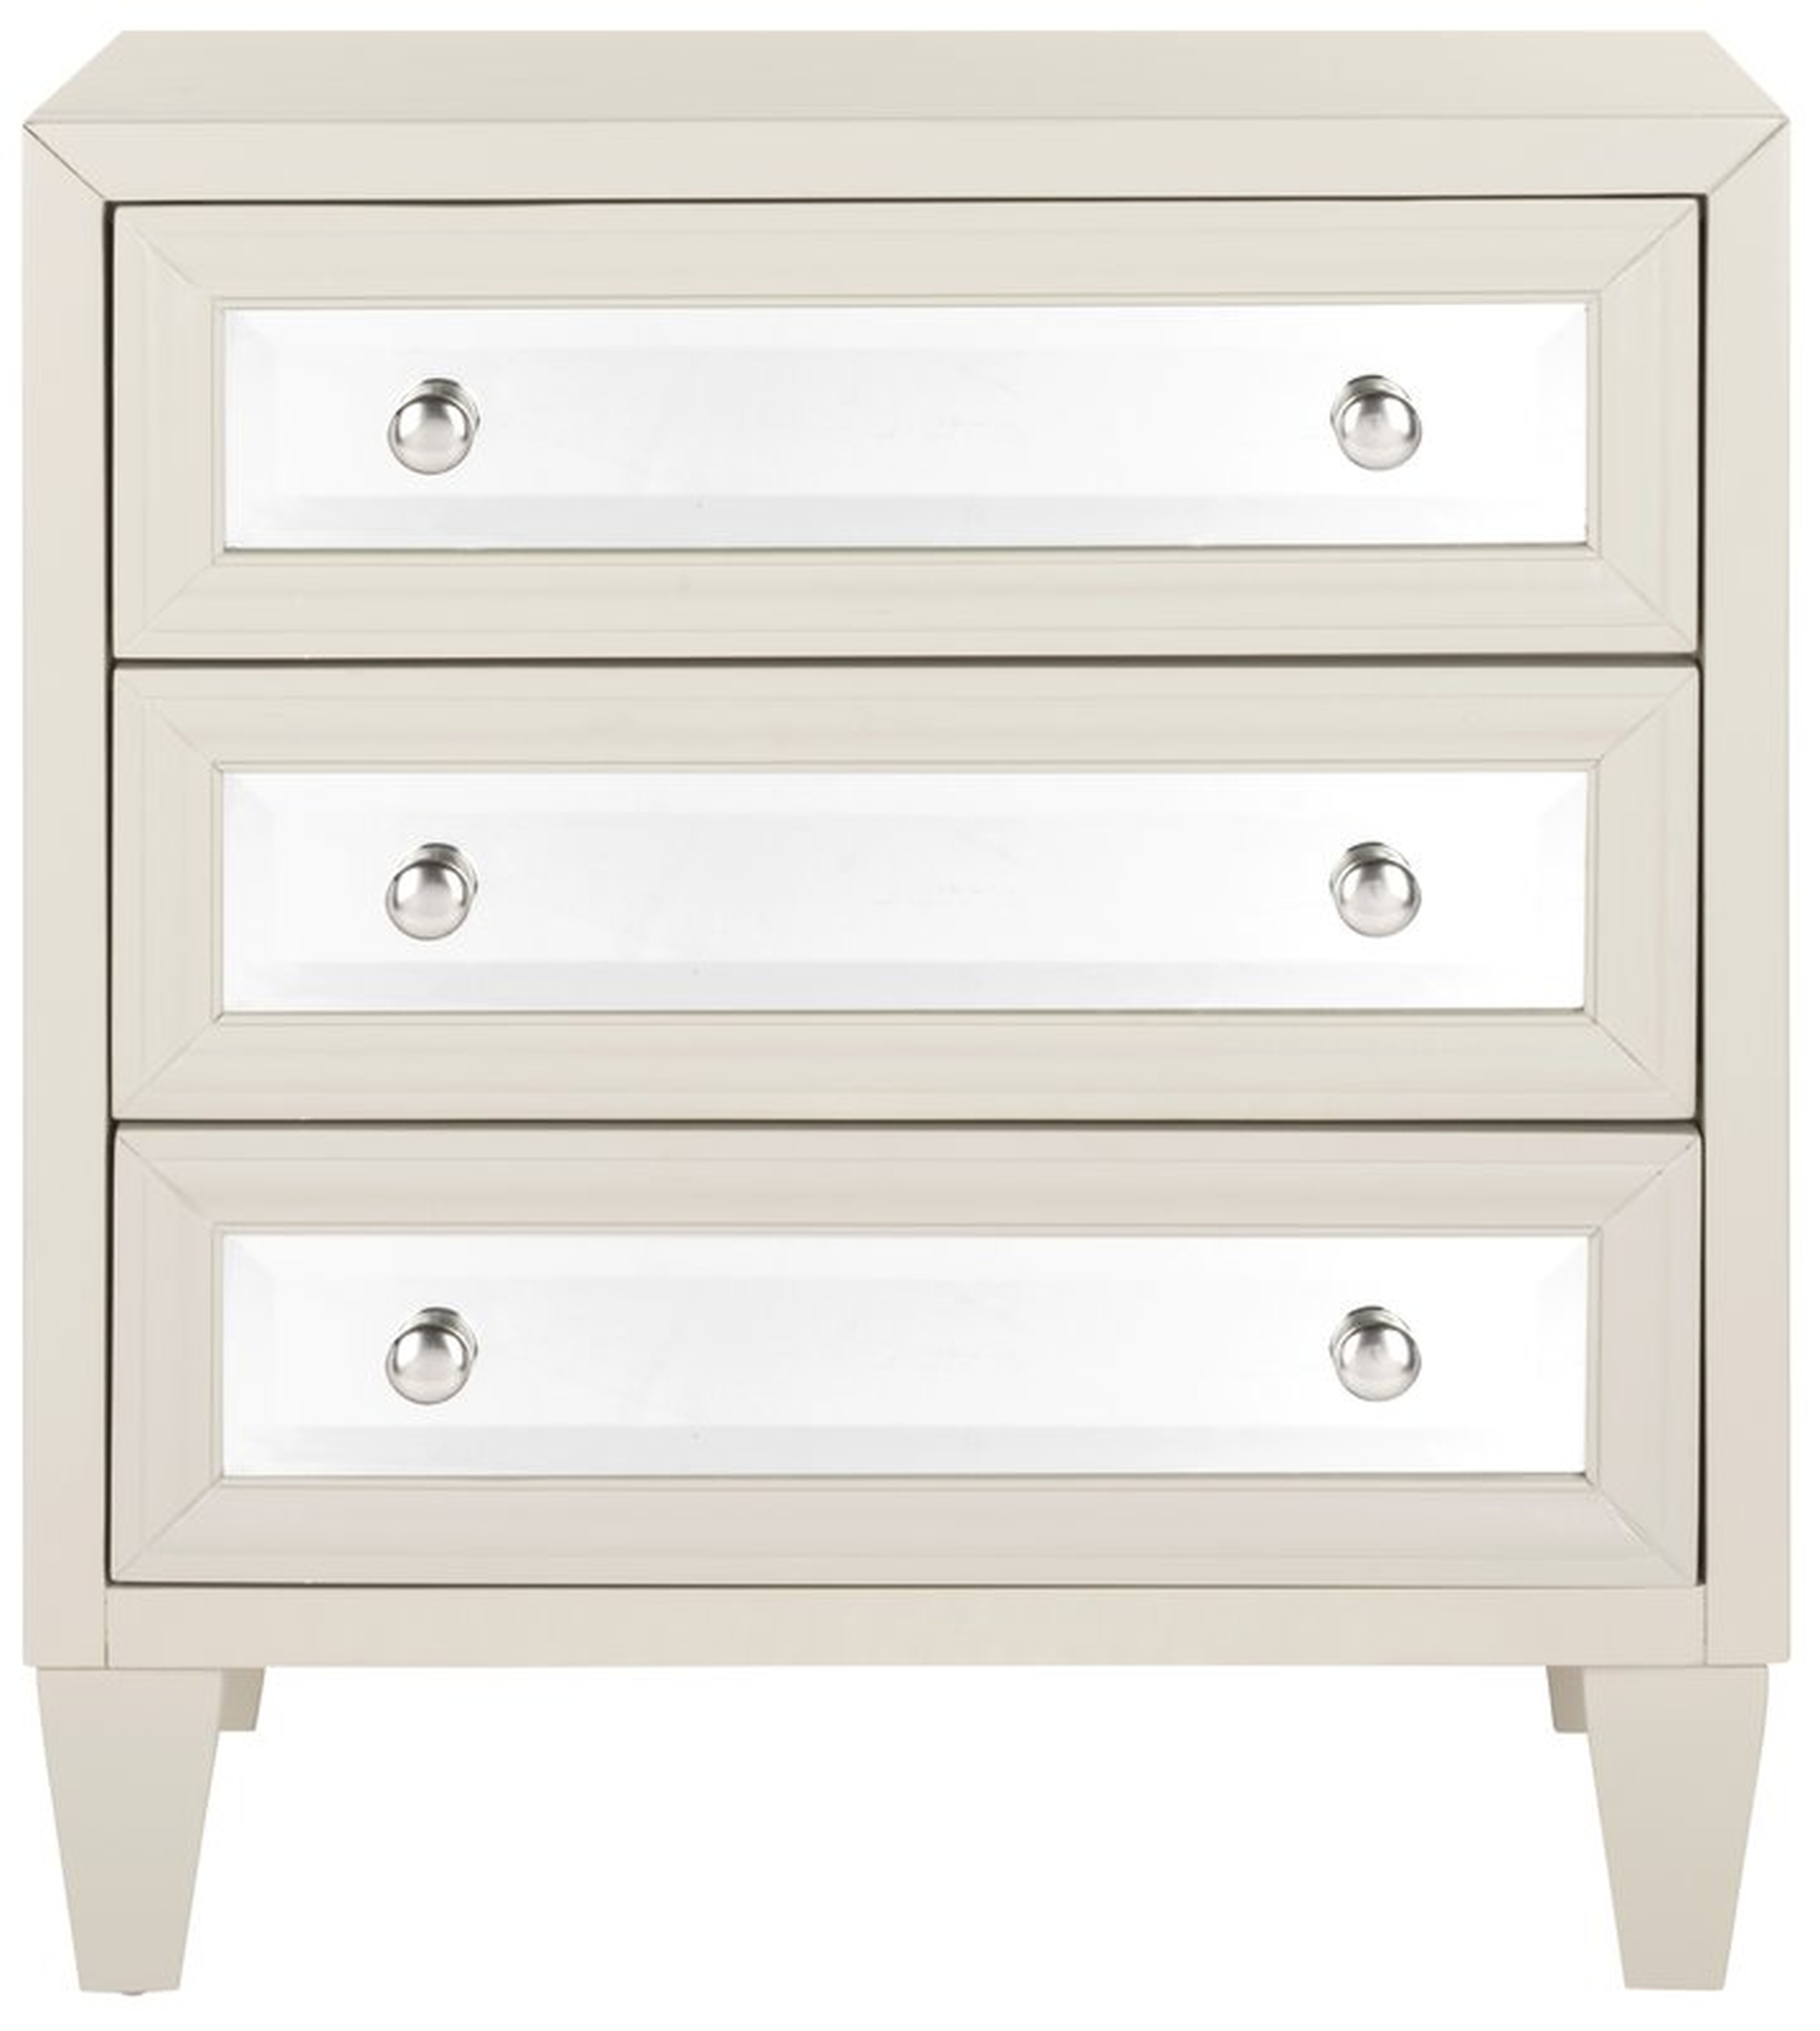 Leandro 3 Drawer Accent Chest - Gray - Wayfair